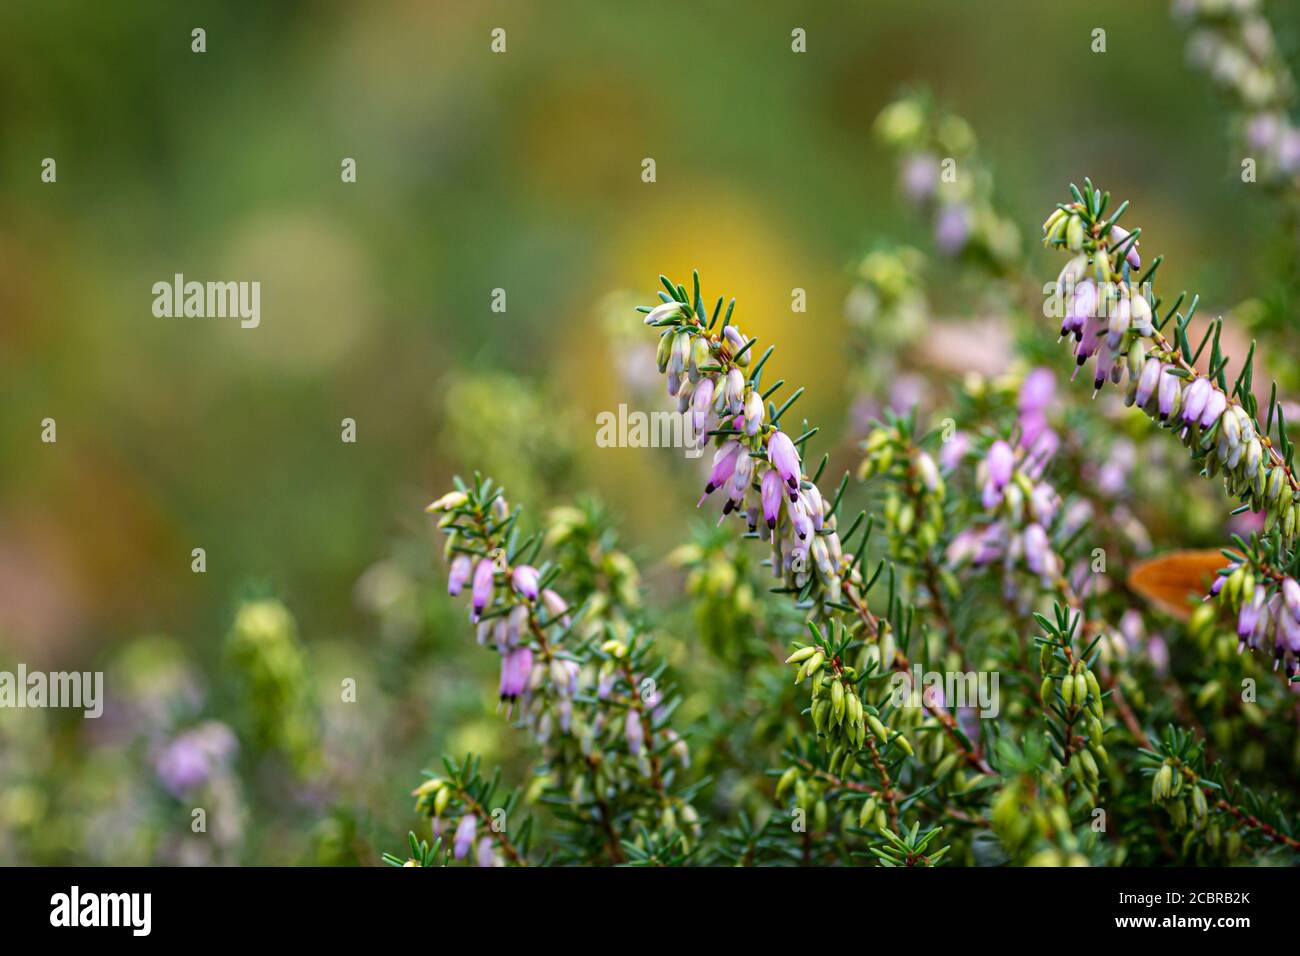 Lilac winter heath plants, with a shallow depth of field Stock Photo